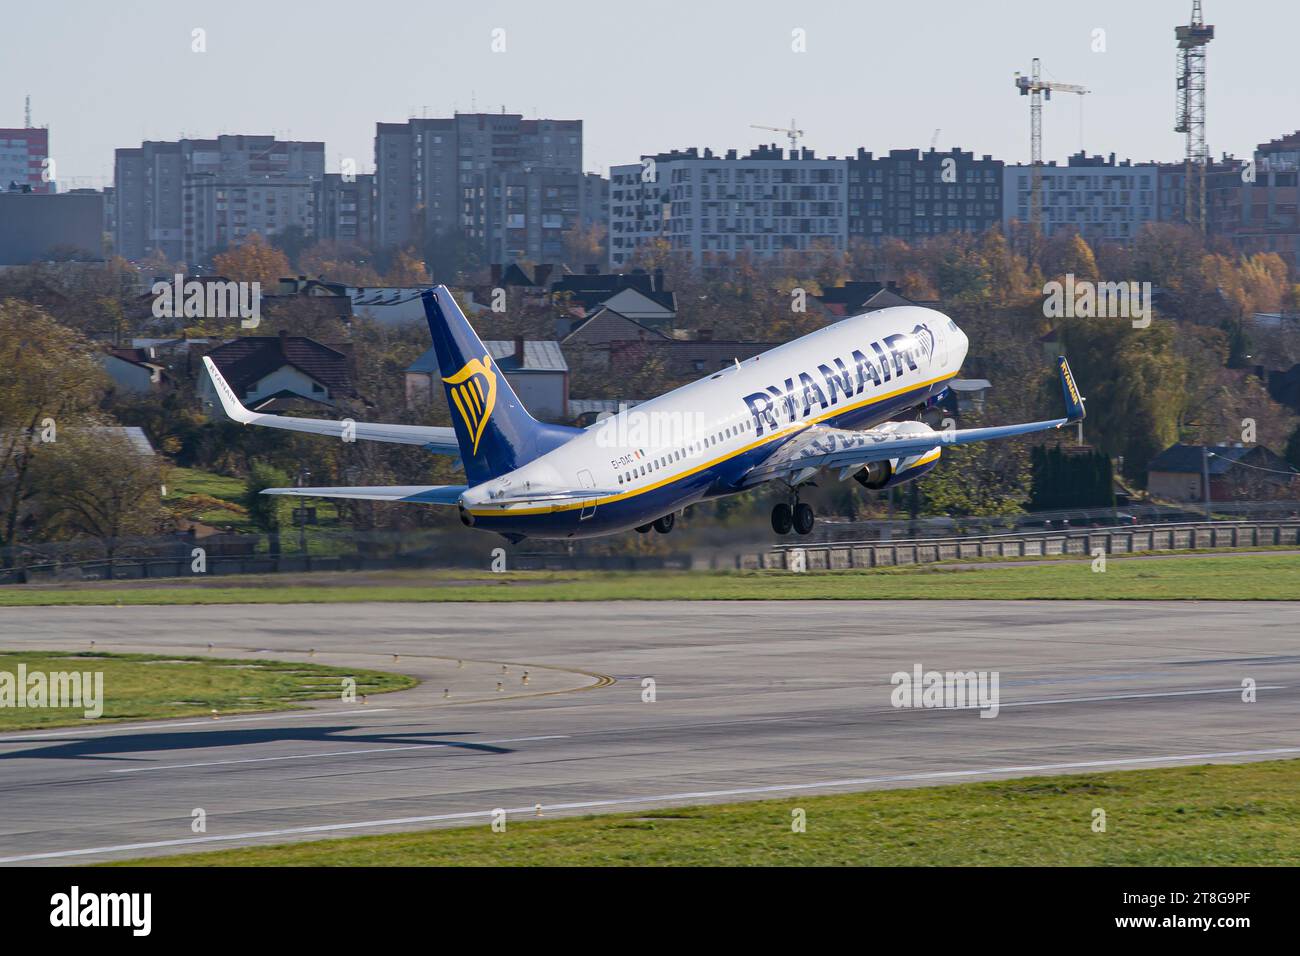 Ryanair Boeing 737-800 aircraft taking off from Lviv Airport with the city in the background Stock Photo